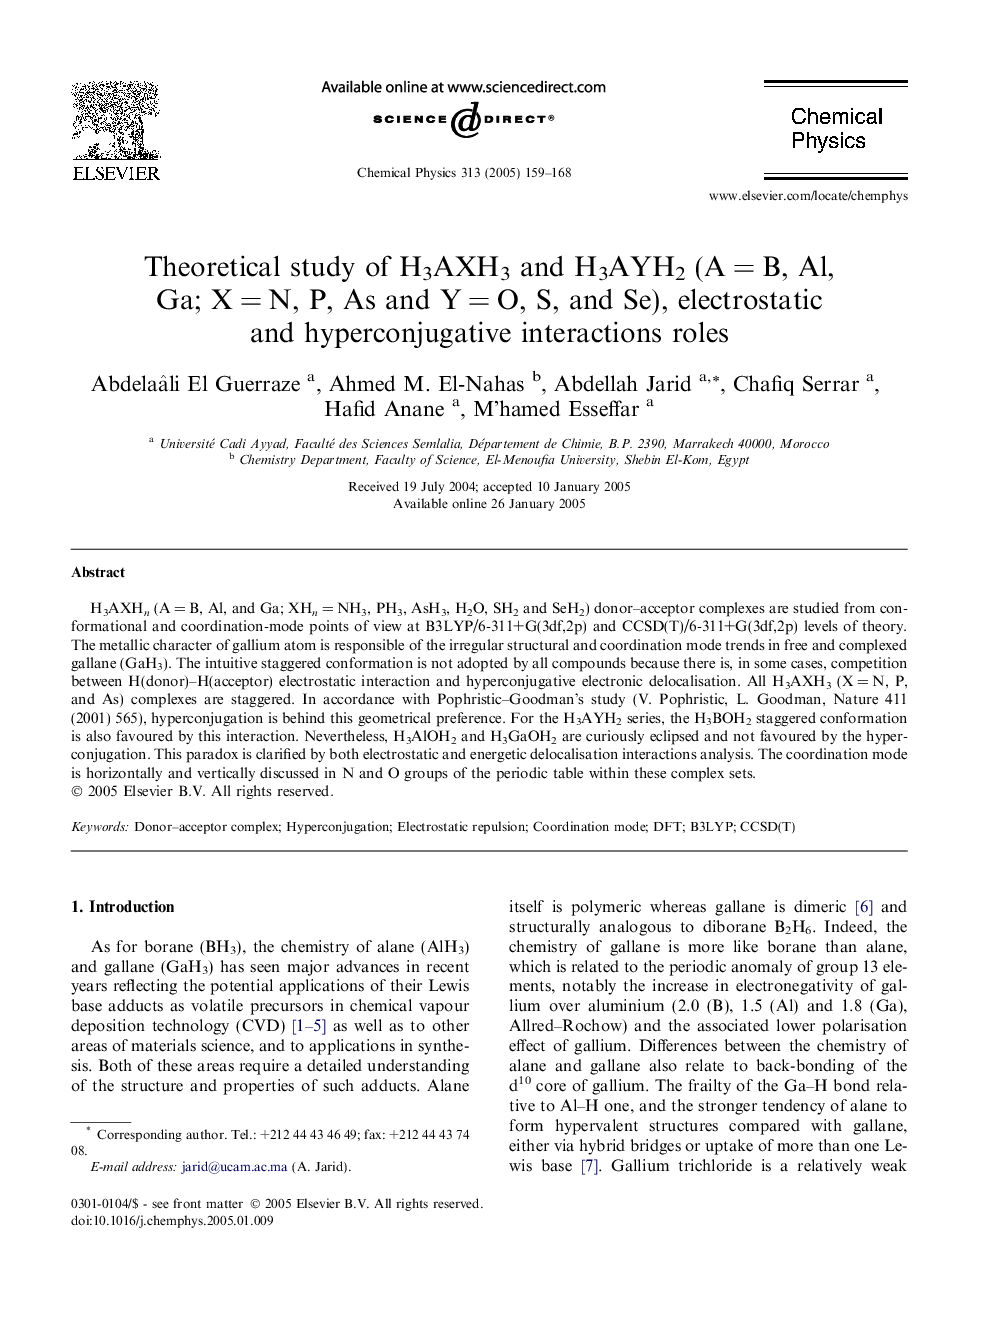 Theoretical study of H3AXH3 and H3AYH2 (AÂ =Â B, Al, Ga; XÂ =Â N, P, As and YÂ =Â O, S, and Se), electrostatic and hyperconjugative interactions roles